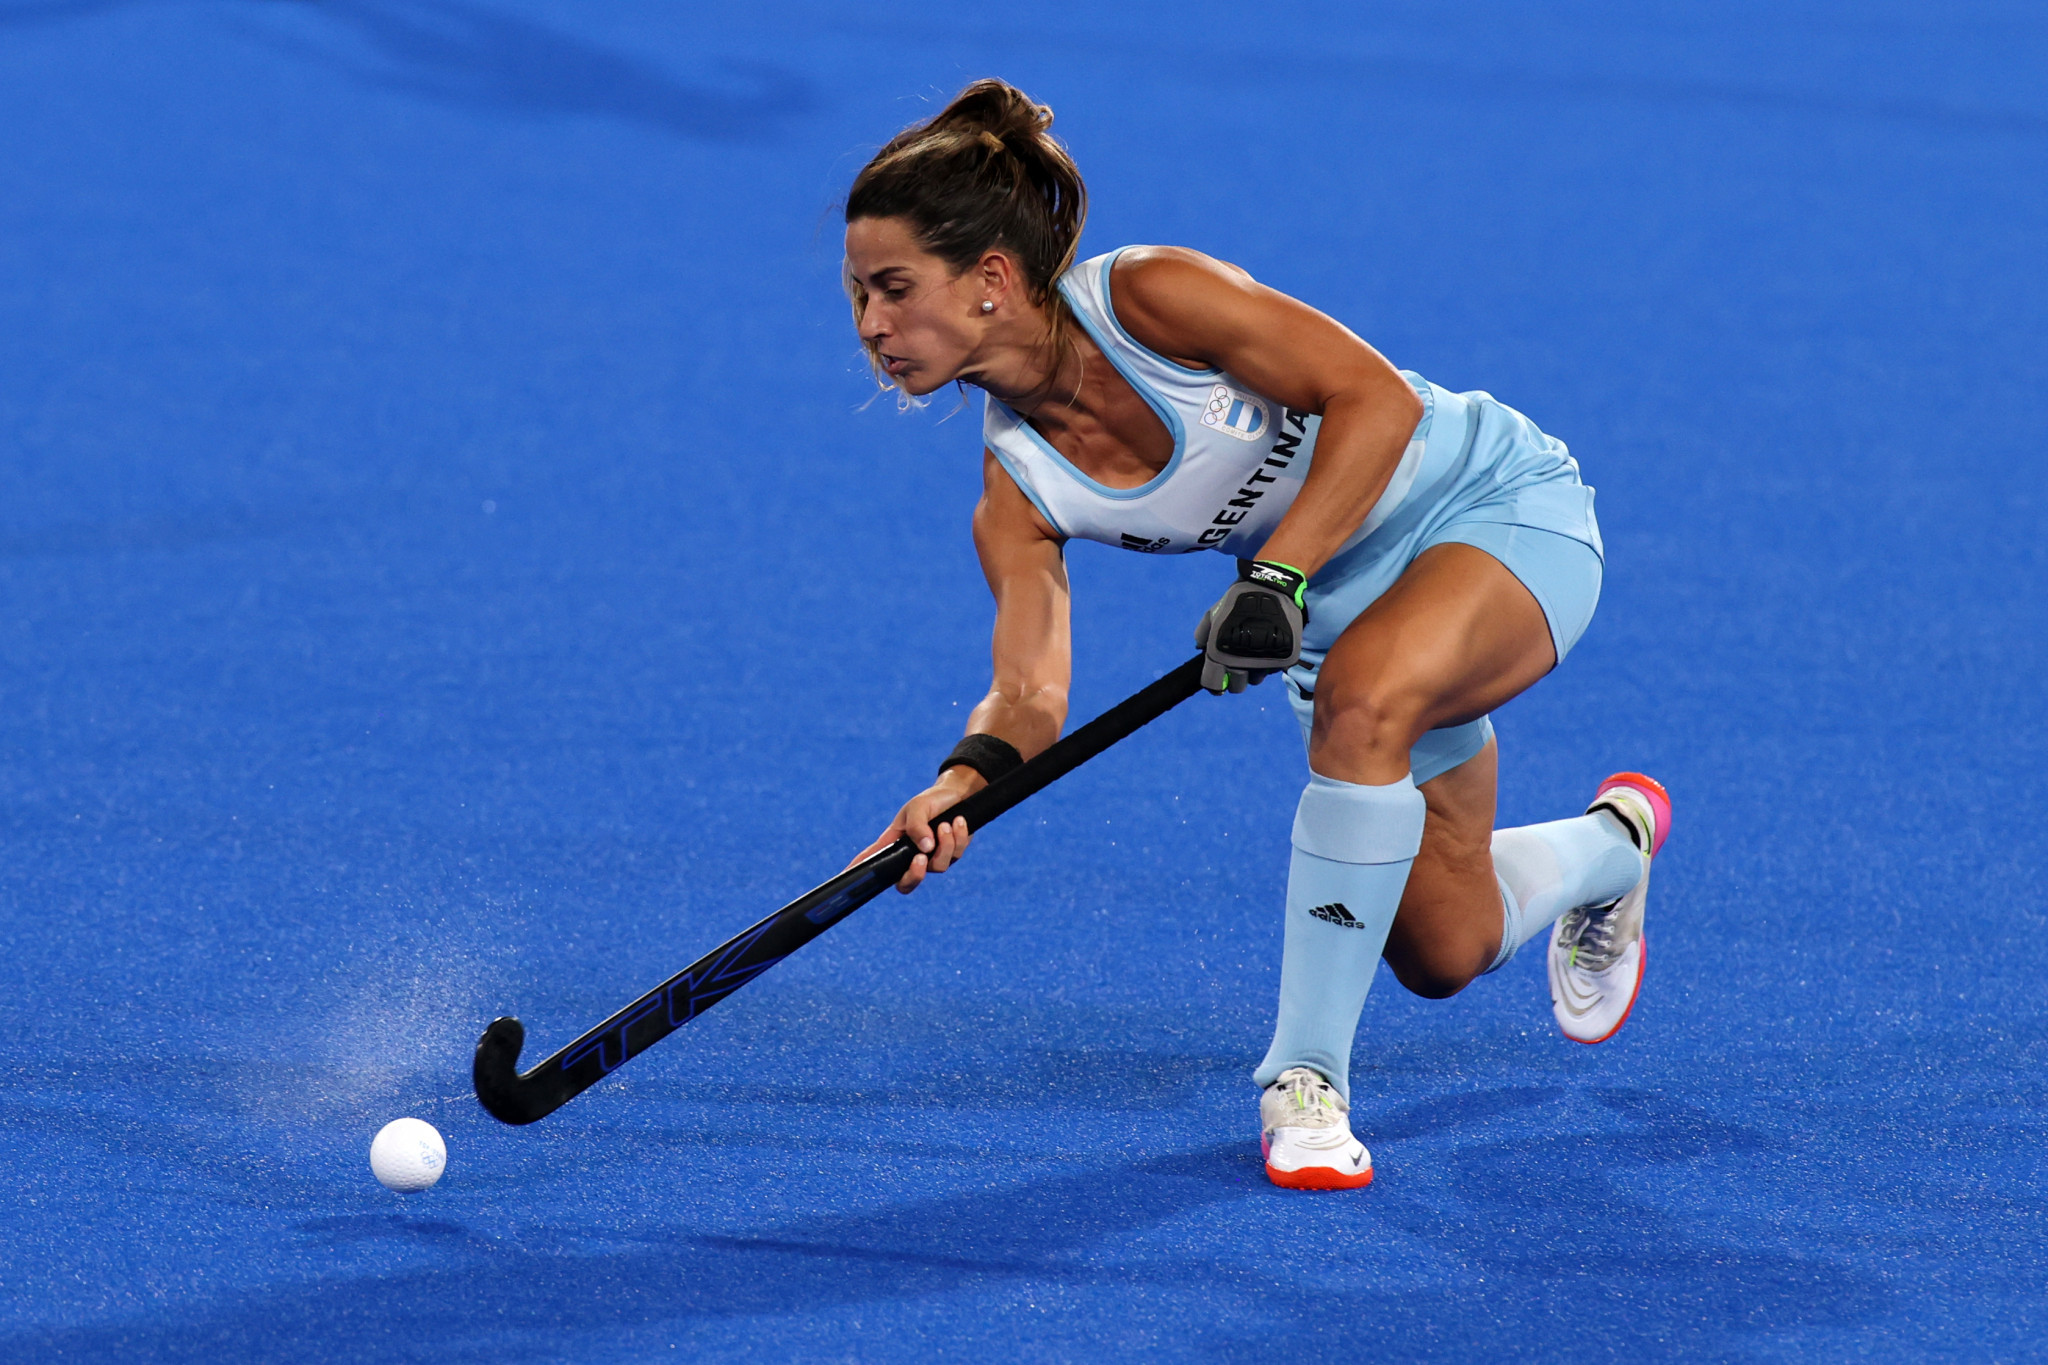 Argentina record double over Spain in FIH Hockey Pro League